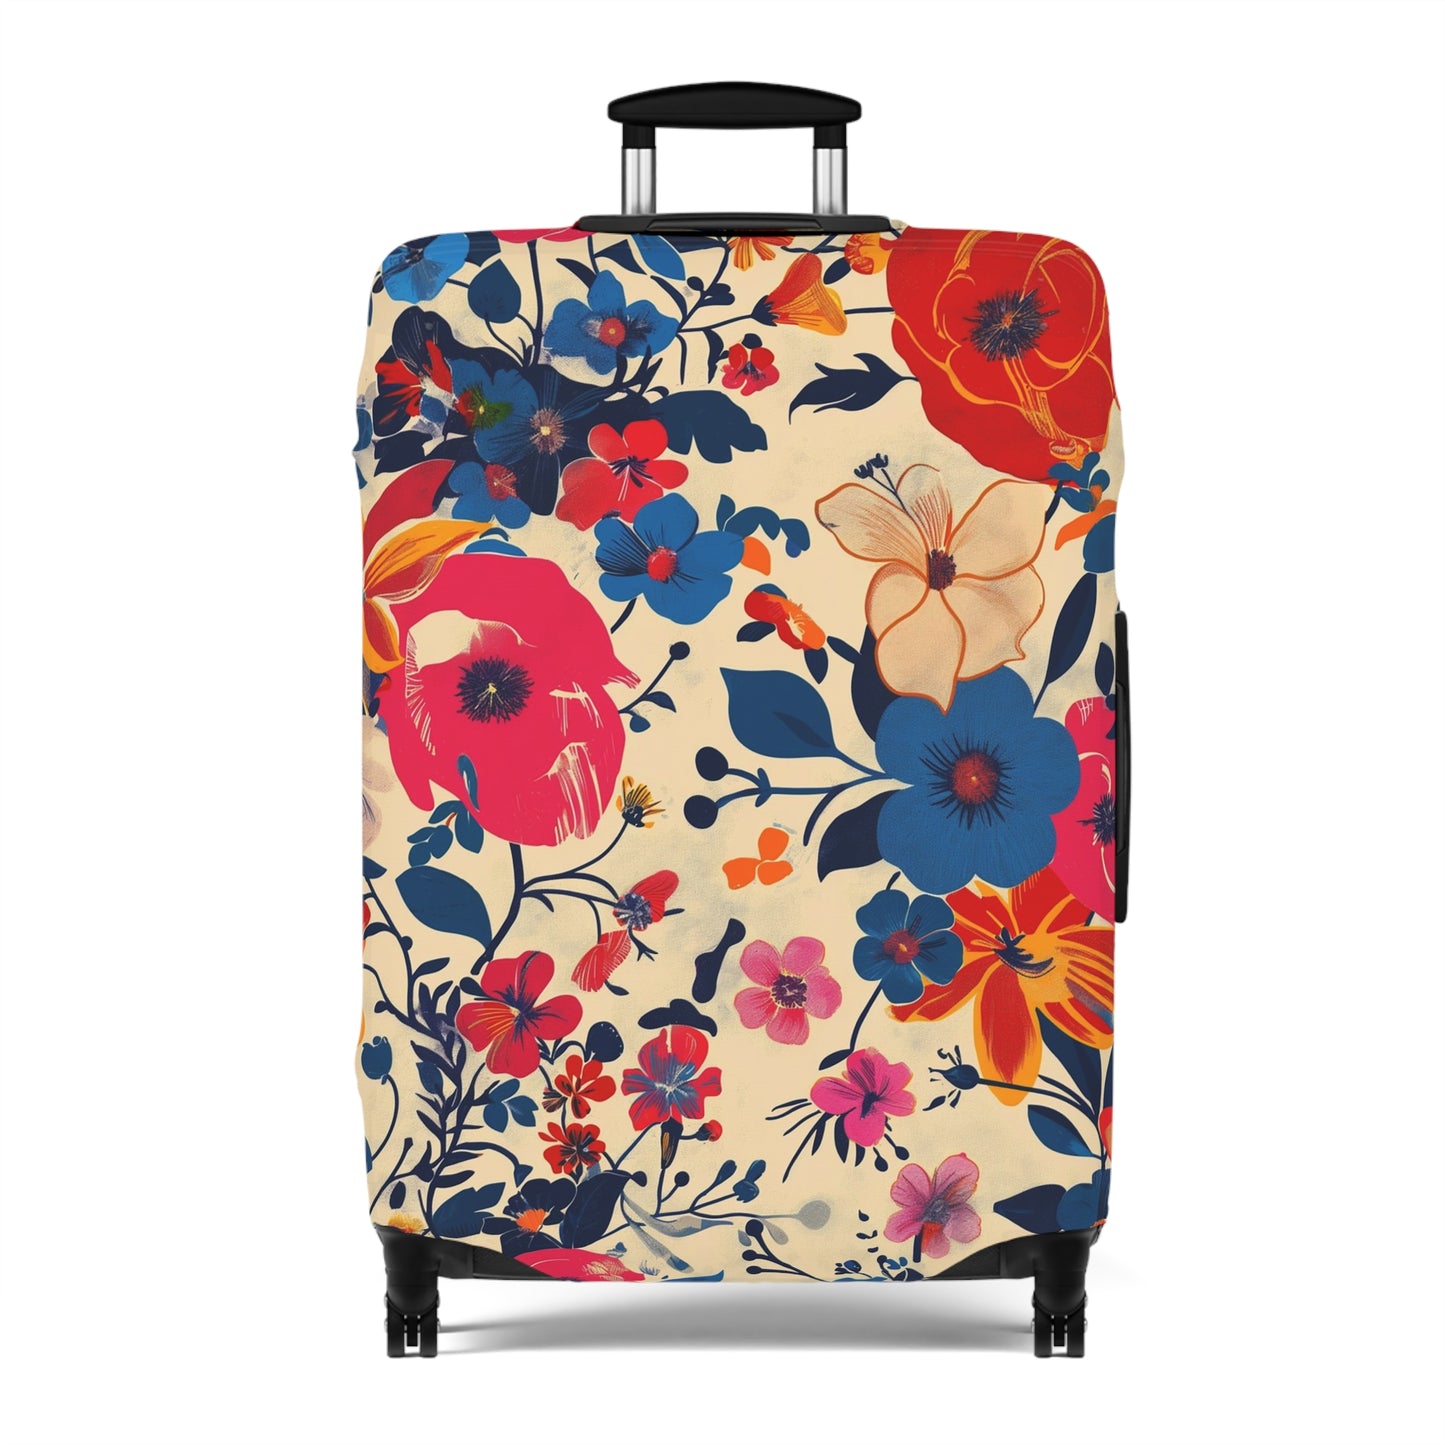 Ladies Luggage Cover White Floral Abstract